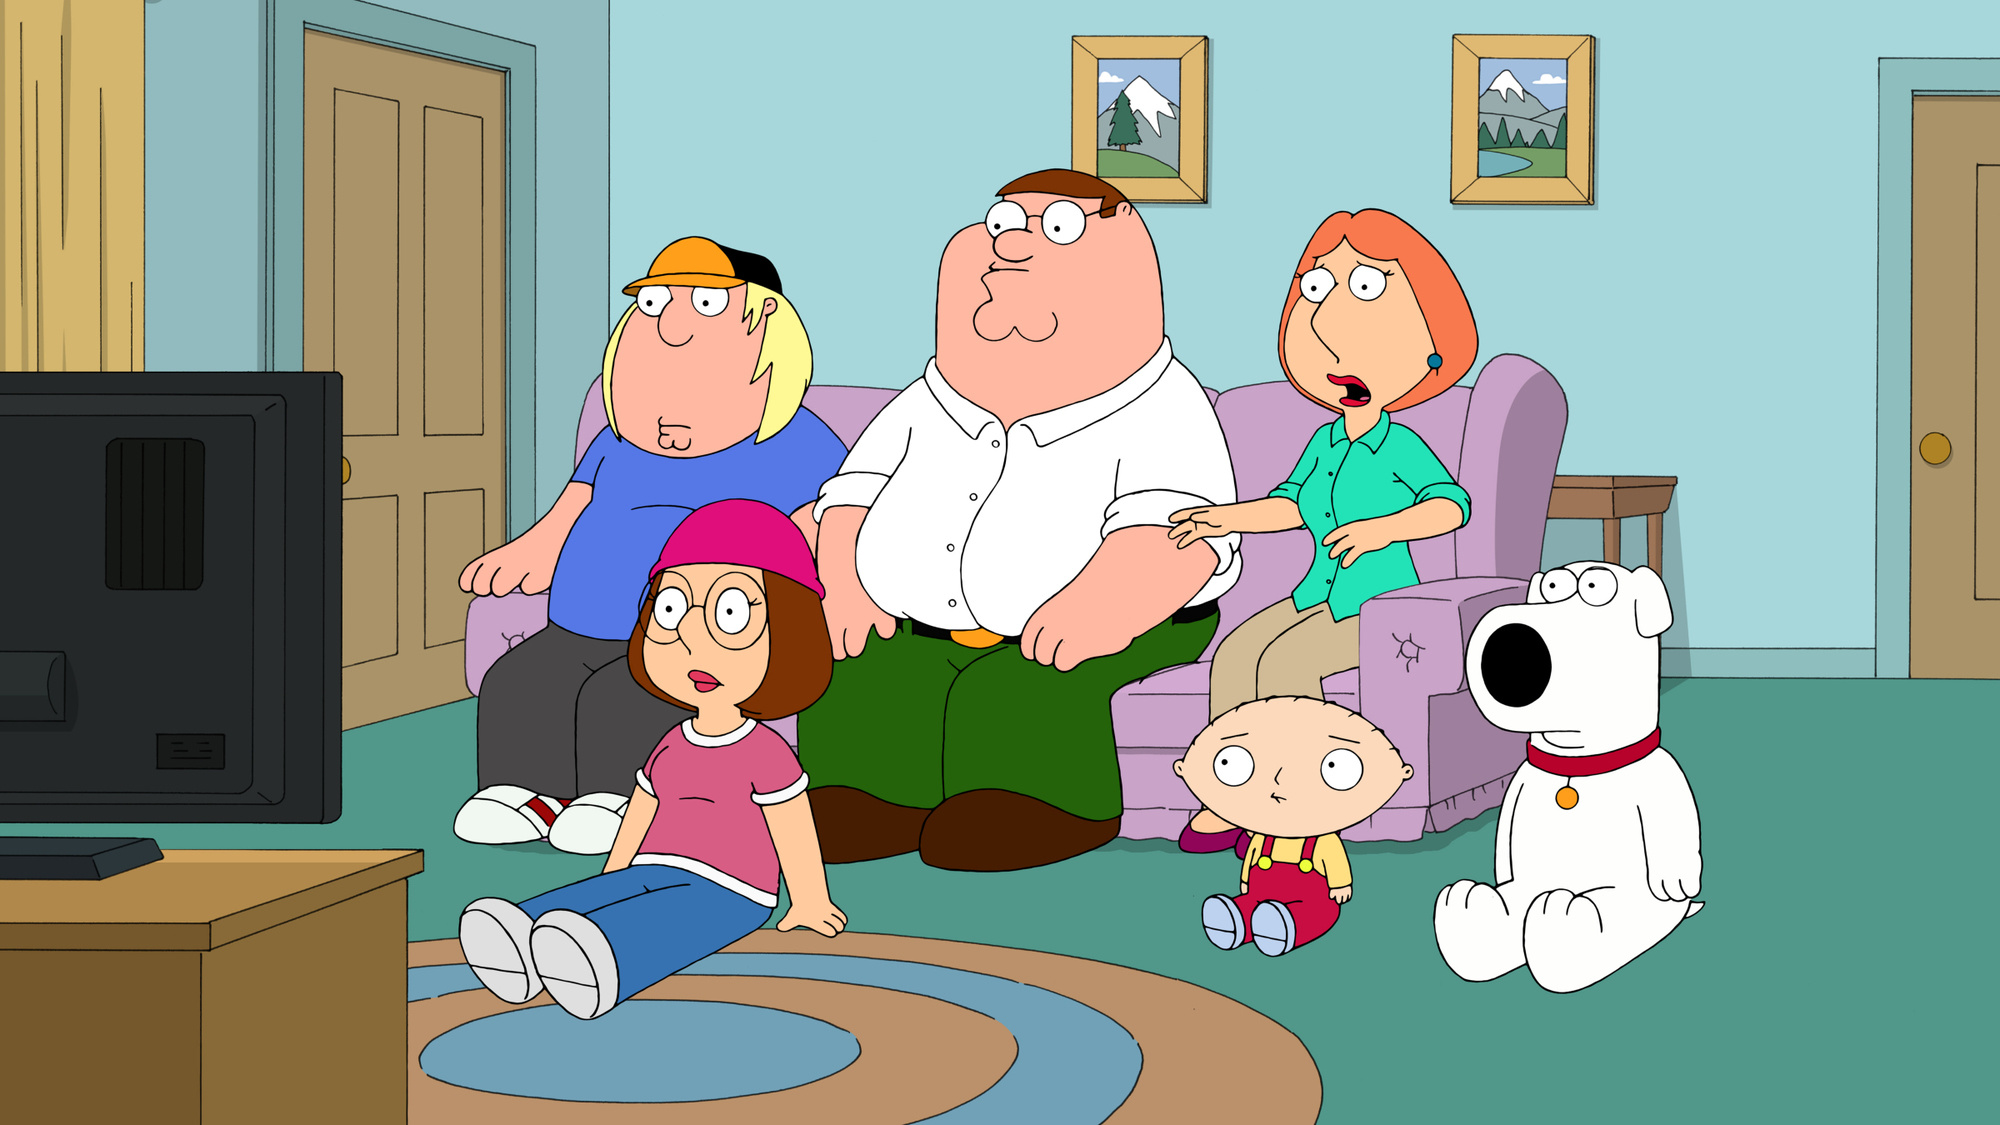 The show Family Guy once used a nine-year old video clip from YouTube in an episode. They did so without receiving permission from the user. Shortly afterward, the original user's clip was taken down from YouTube citing copyright infringement.